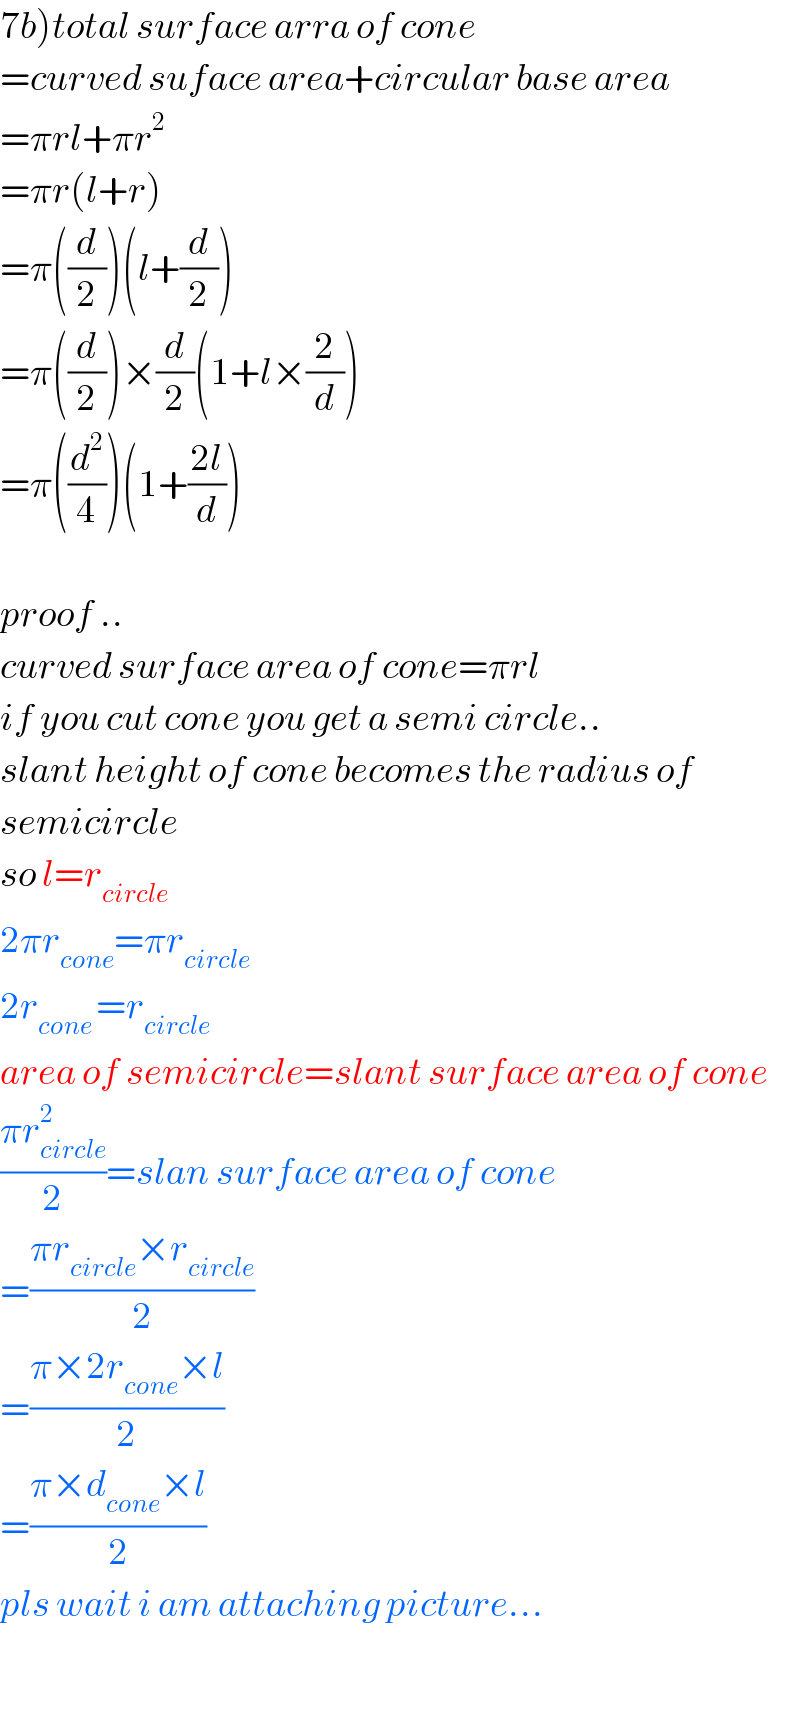 7b)total surface arra of cone  =curved suface area+circular base area  =πrl+πr^2   =πr(l+r)  =π((d/2))(l+(d/2))  =π((d/2))×(d/2)(1+l×(2/d))  =π((d^2 /4))(1+((2l)/d))    proof ..  curved surface area of cone=πrl  if you cut cone you get a semi circle..  slant height of cone becomes the radius of  semicircle  so l=r_(circle)   2πr_(cone) =πr_(circle)   2r_(cone ) =r_(circle)   area of semicircle=slant surface area of cone  ((πr_(circle) ^2 )/2)=slan surface area of cone  =((πr_(circle) ×r_(circle) )/2)  =((π×2r_(cone) ×l)/2)  =((π×d_(cone) ×l)/2)  pls wait i am attaching picture...    